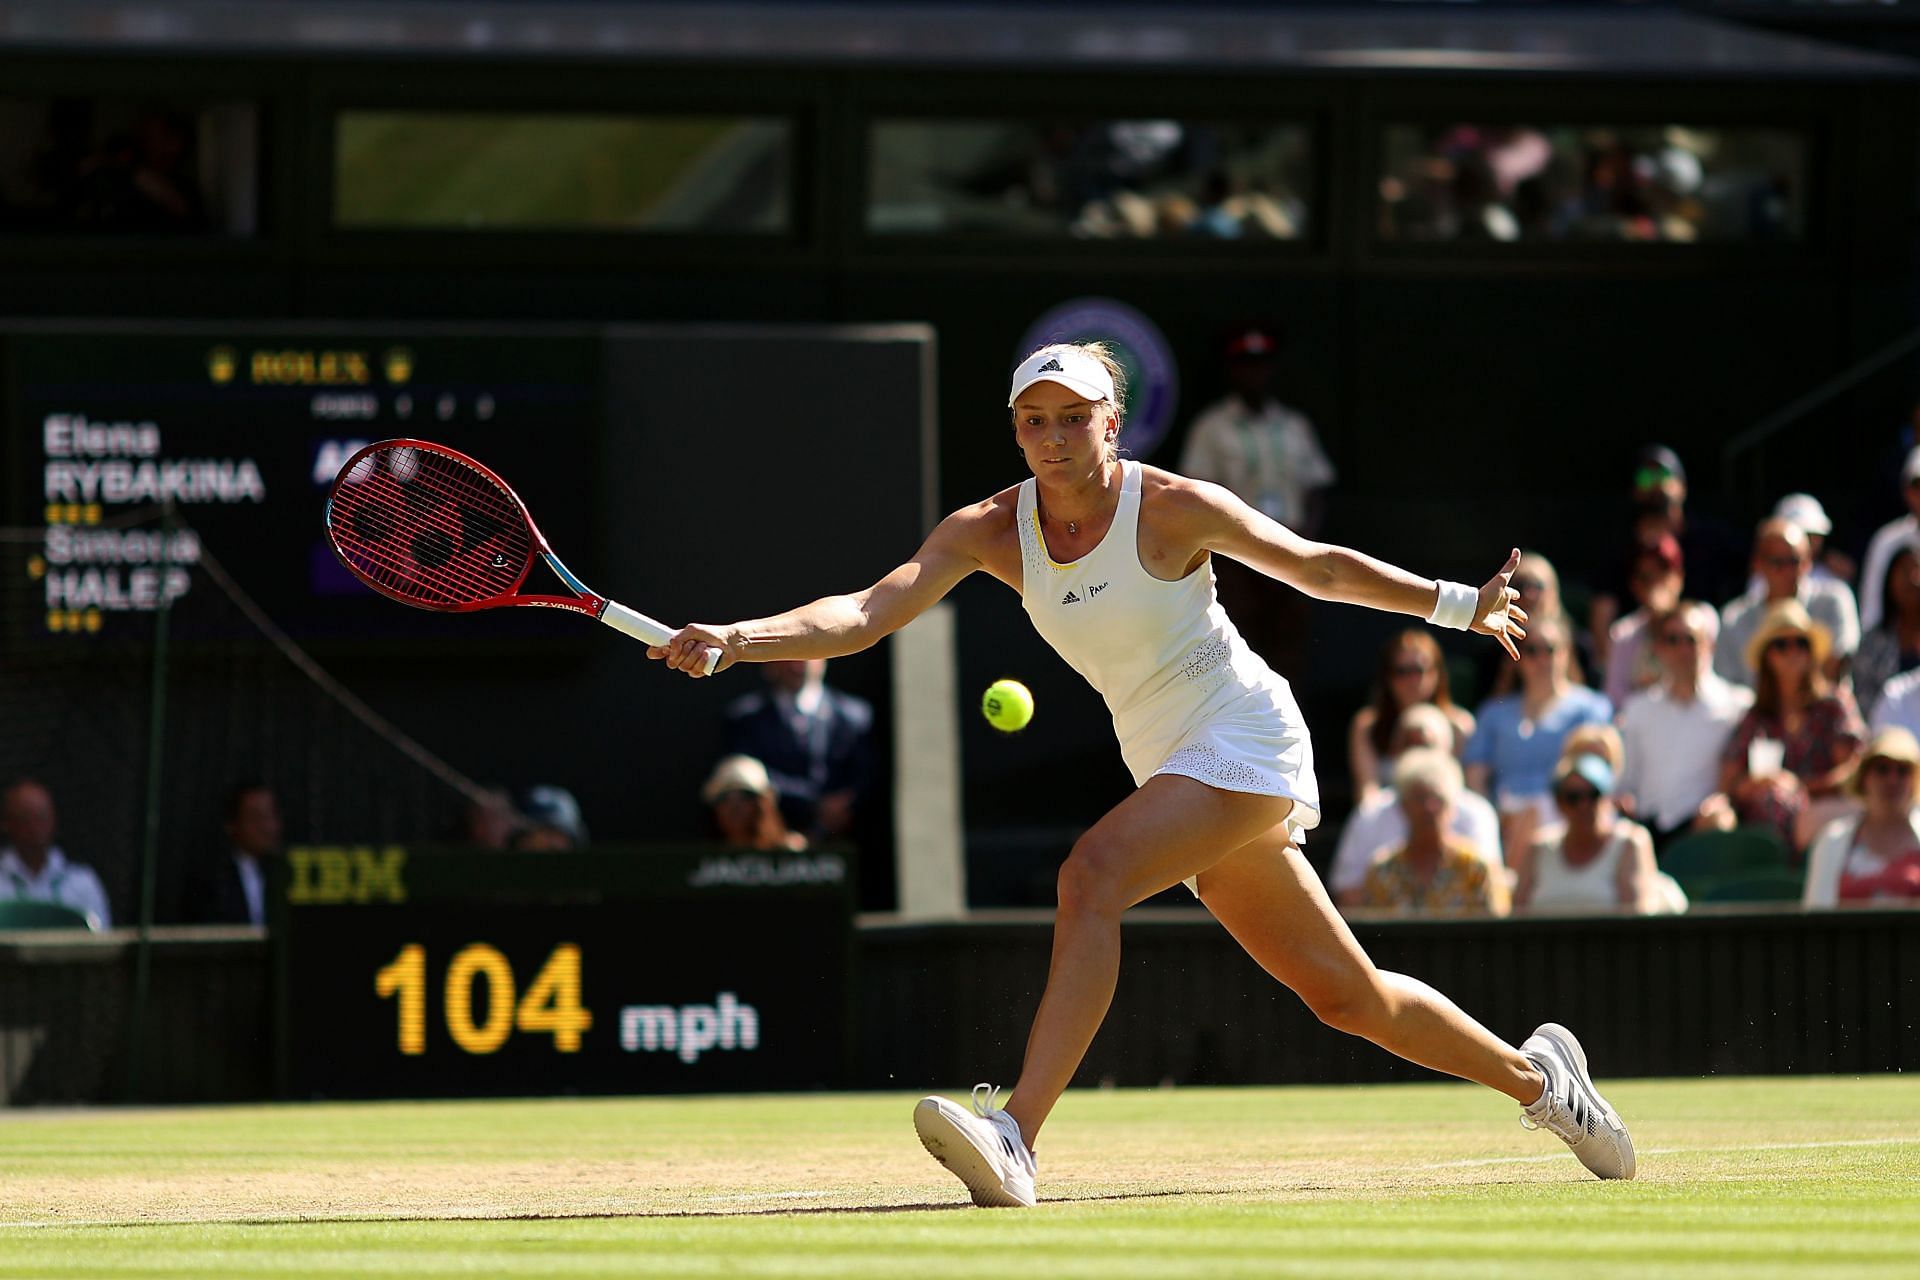 Elena Rybakina stretches to reach the ball during her semifinal match at the 2022 Wimbledon Championships